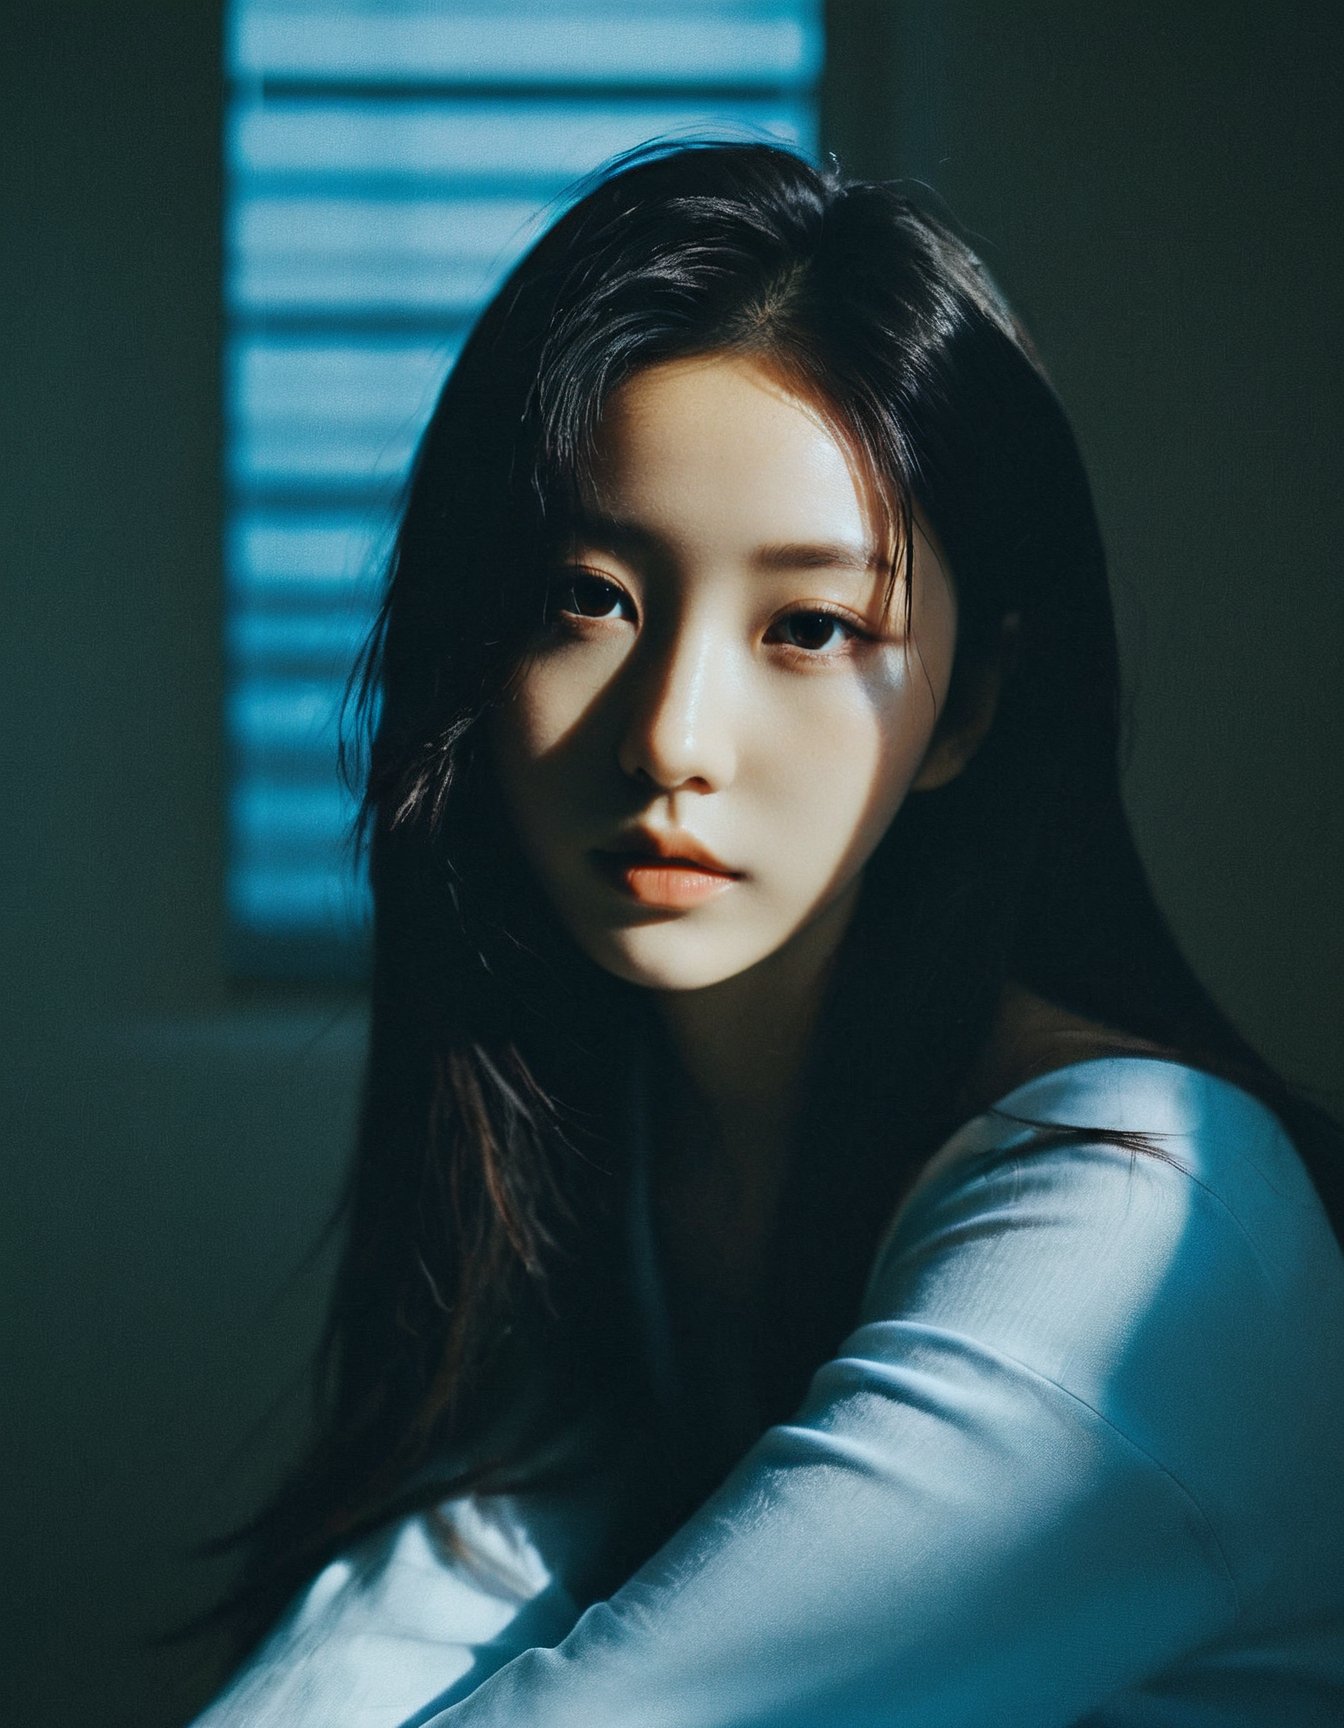 a young woman,looking at the camera,posing,ulzzang,naver fanpop,ffffound,streaming on twitch,character album cover,blues moment,style of Alessio Albi,daily wear,moody lighting,appropriate comparison of cold and warm,reality,
